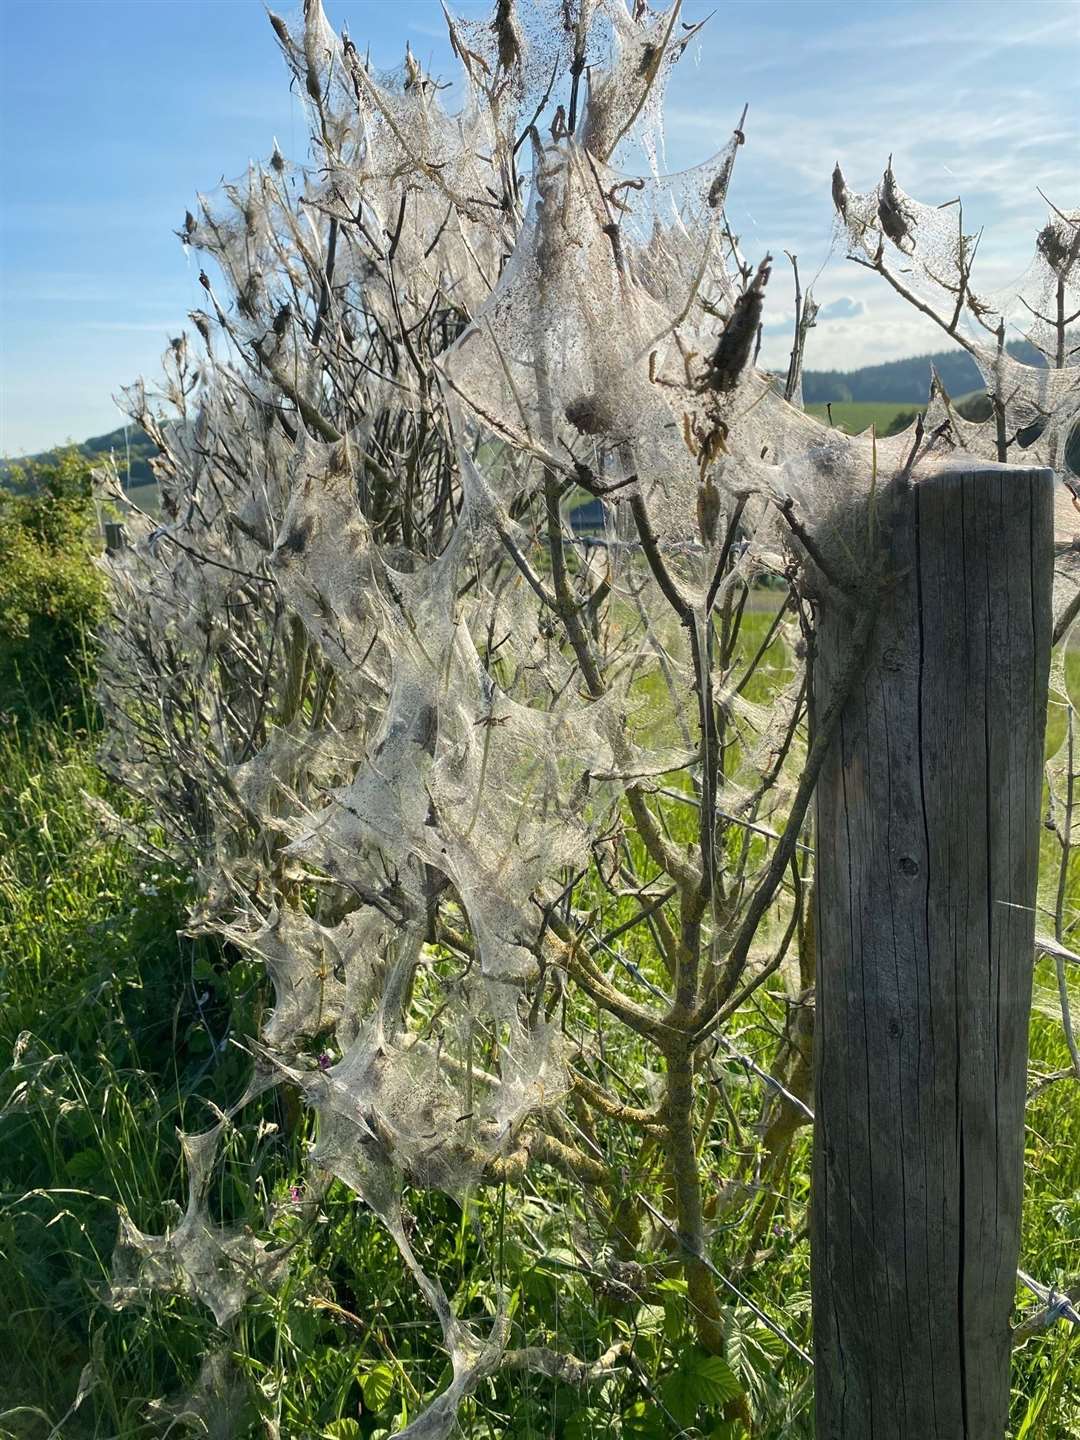 Some species of moth can smother plants and hedgerows with a cobweb-like covering